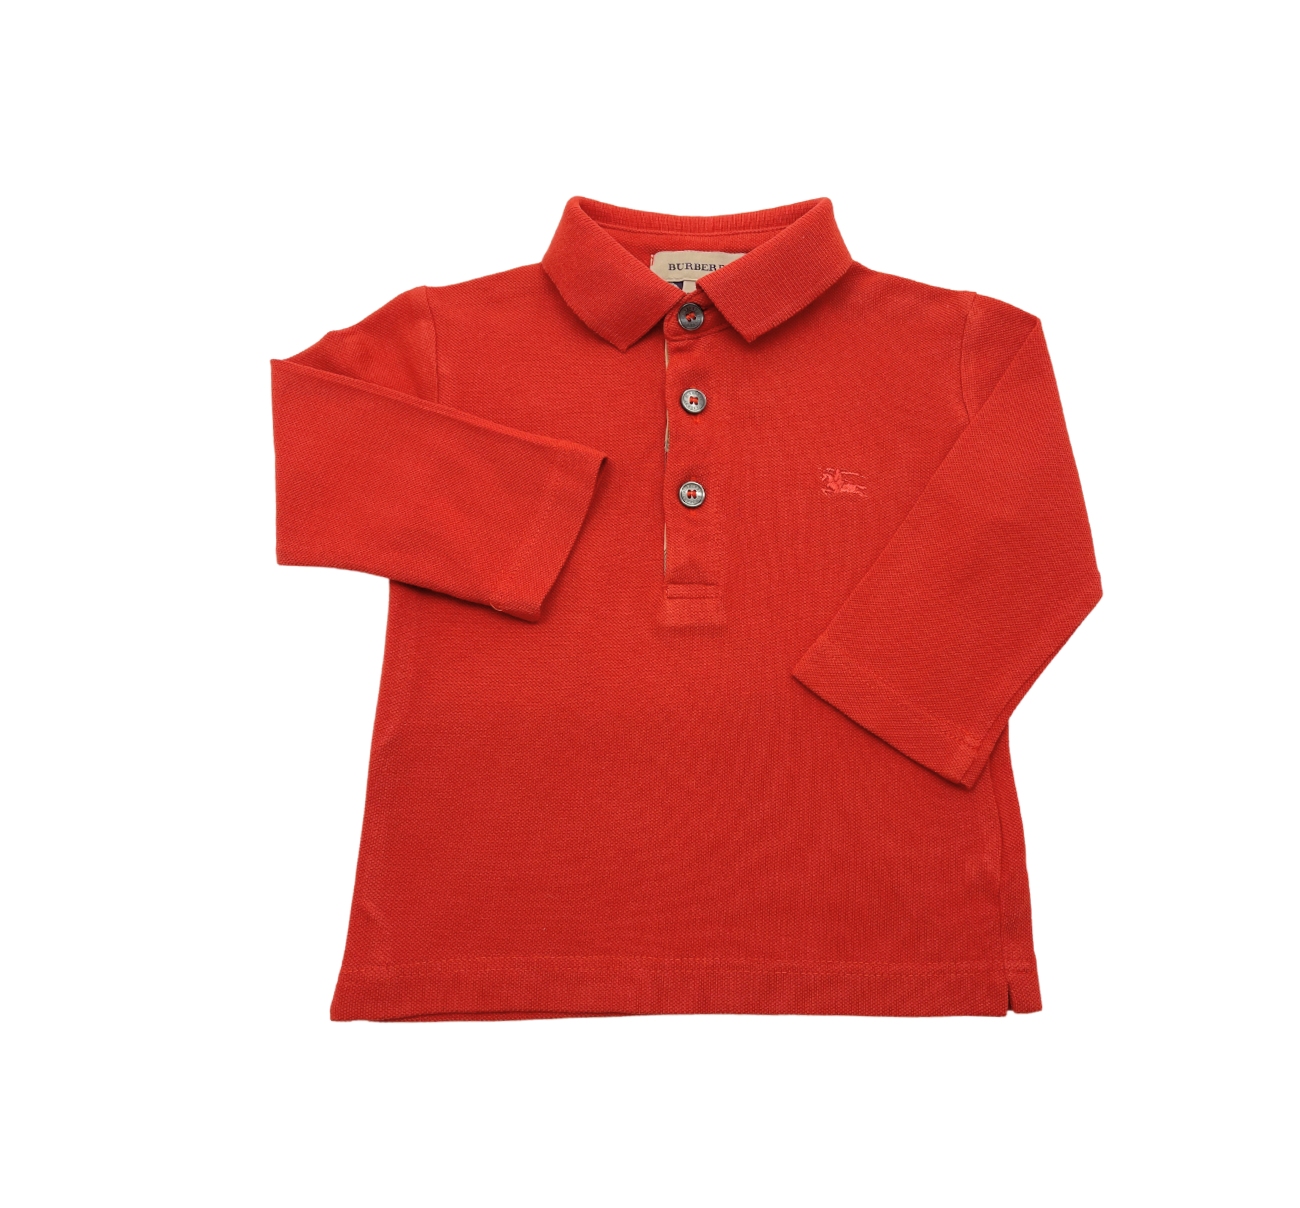 BURBERRY - Polo rouge - 9 mois